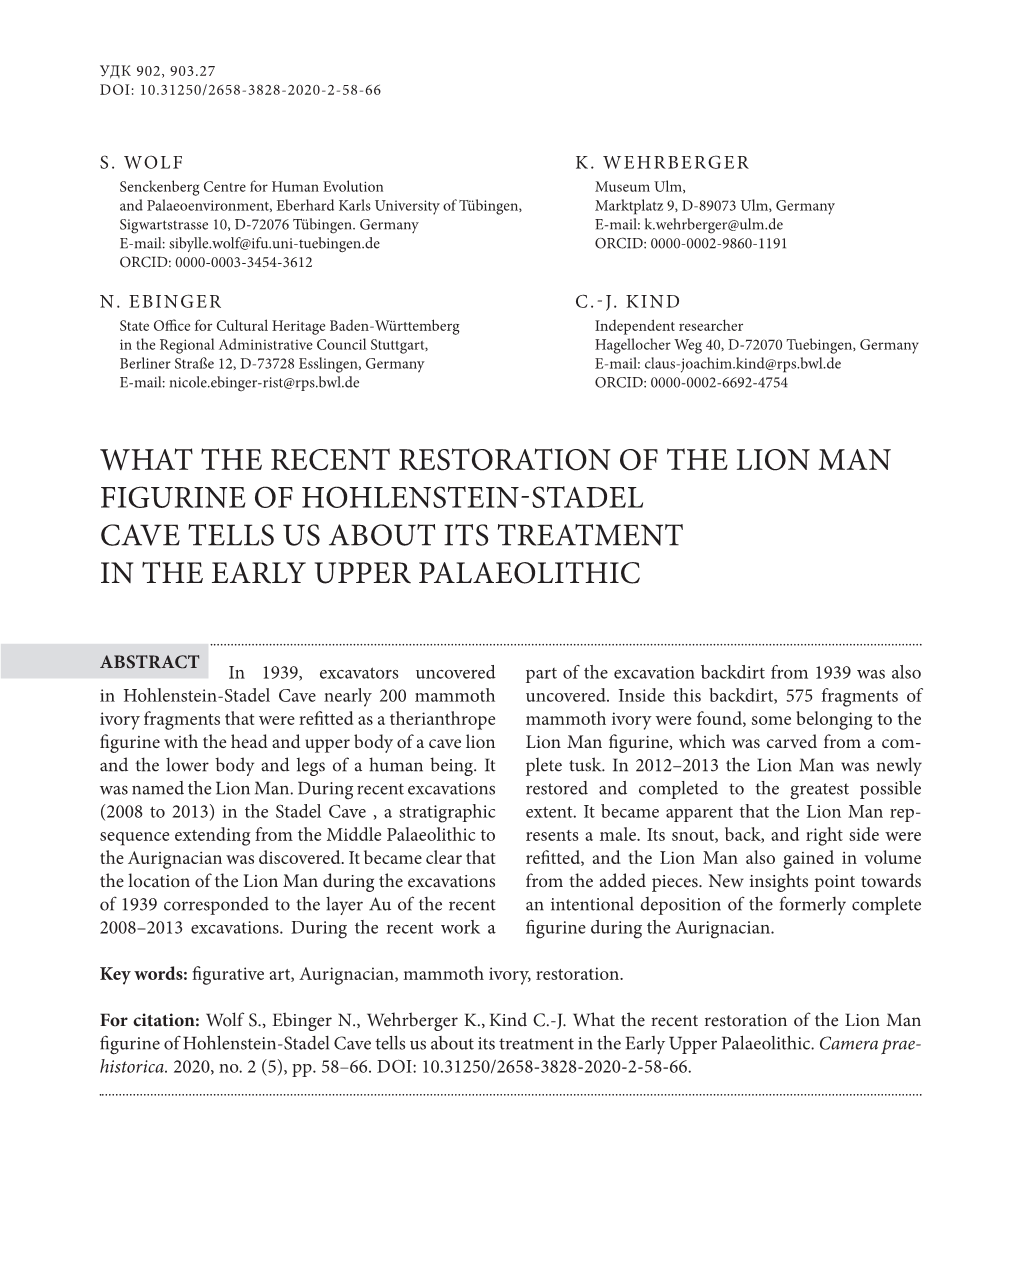 What the Recent Restoration of the Lion Man Figurine of Hohlenstein-Stadel Cave Tells Us About Its Treatment in the Early Upper Palaeolithic